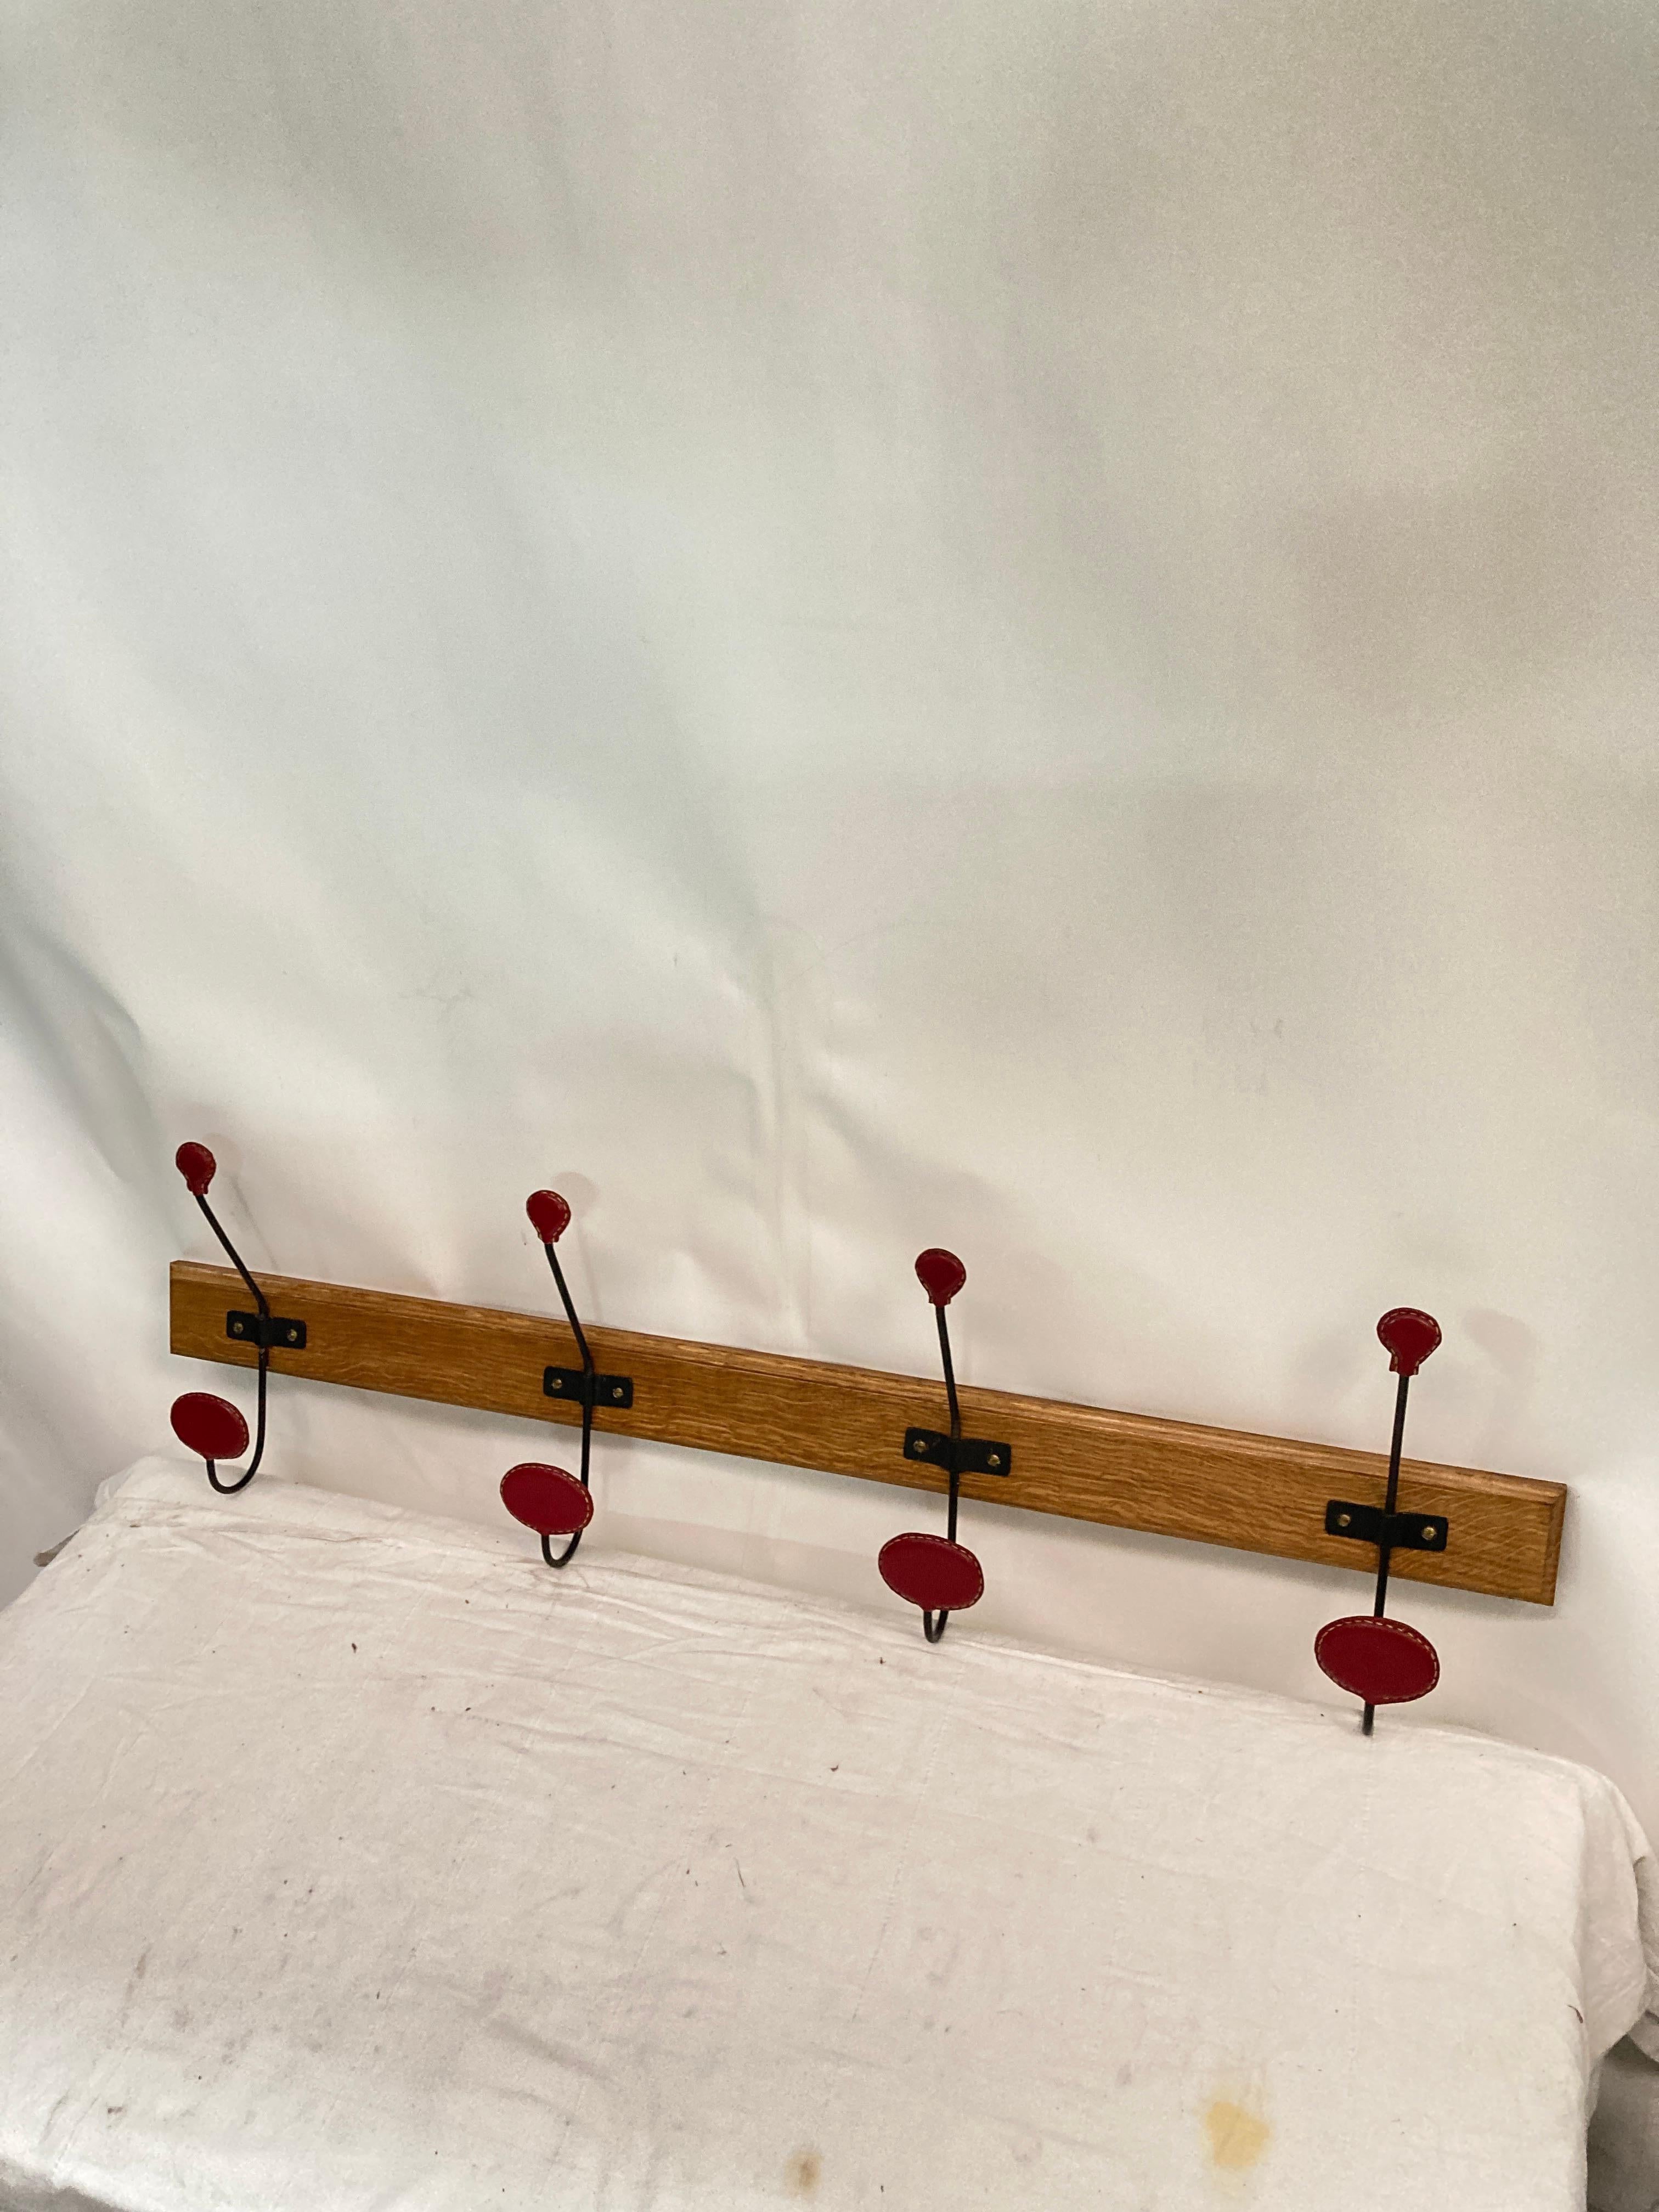 1950's Stitched leather and oak coat rack by Jacques Adnet
France